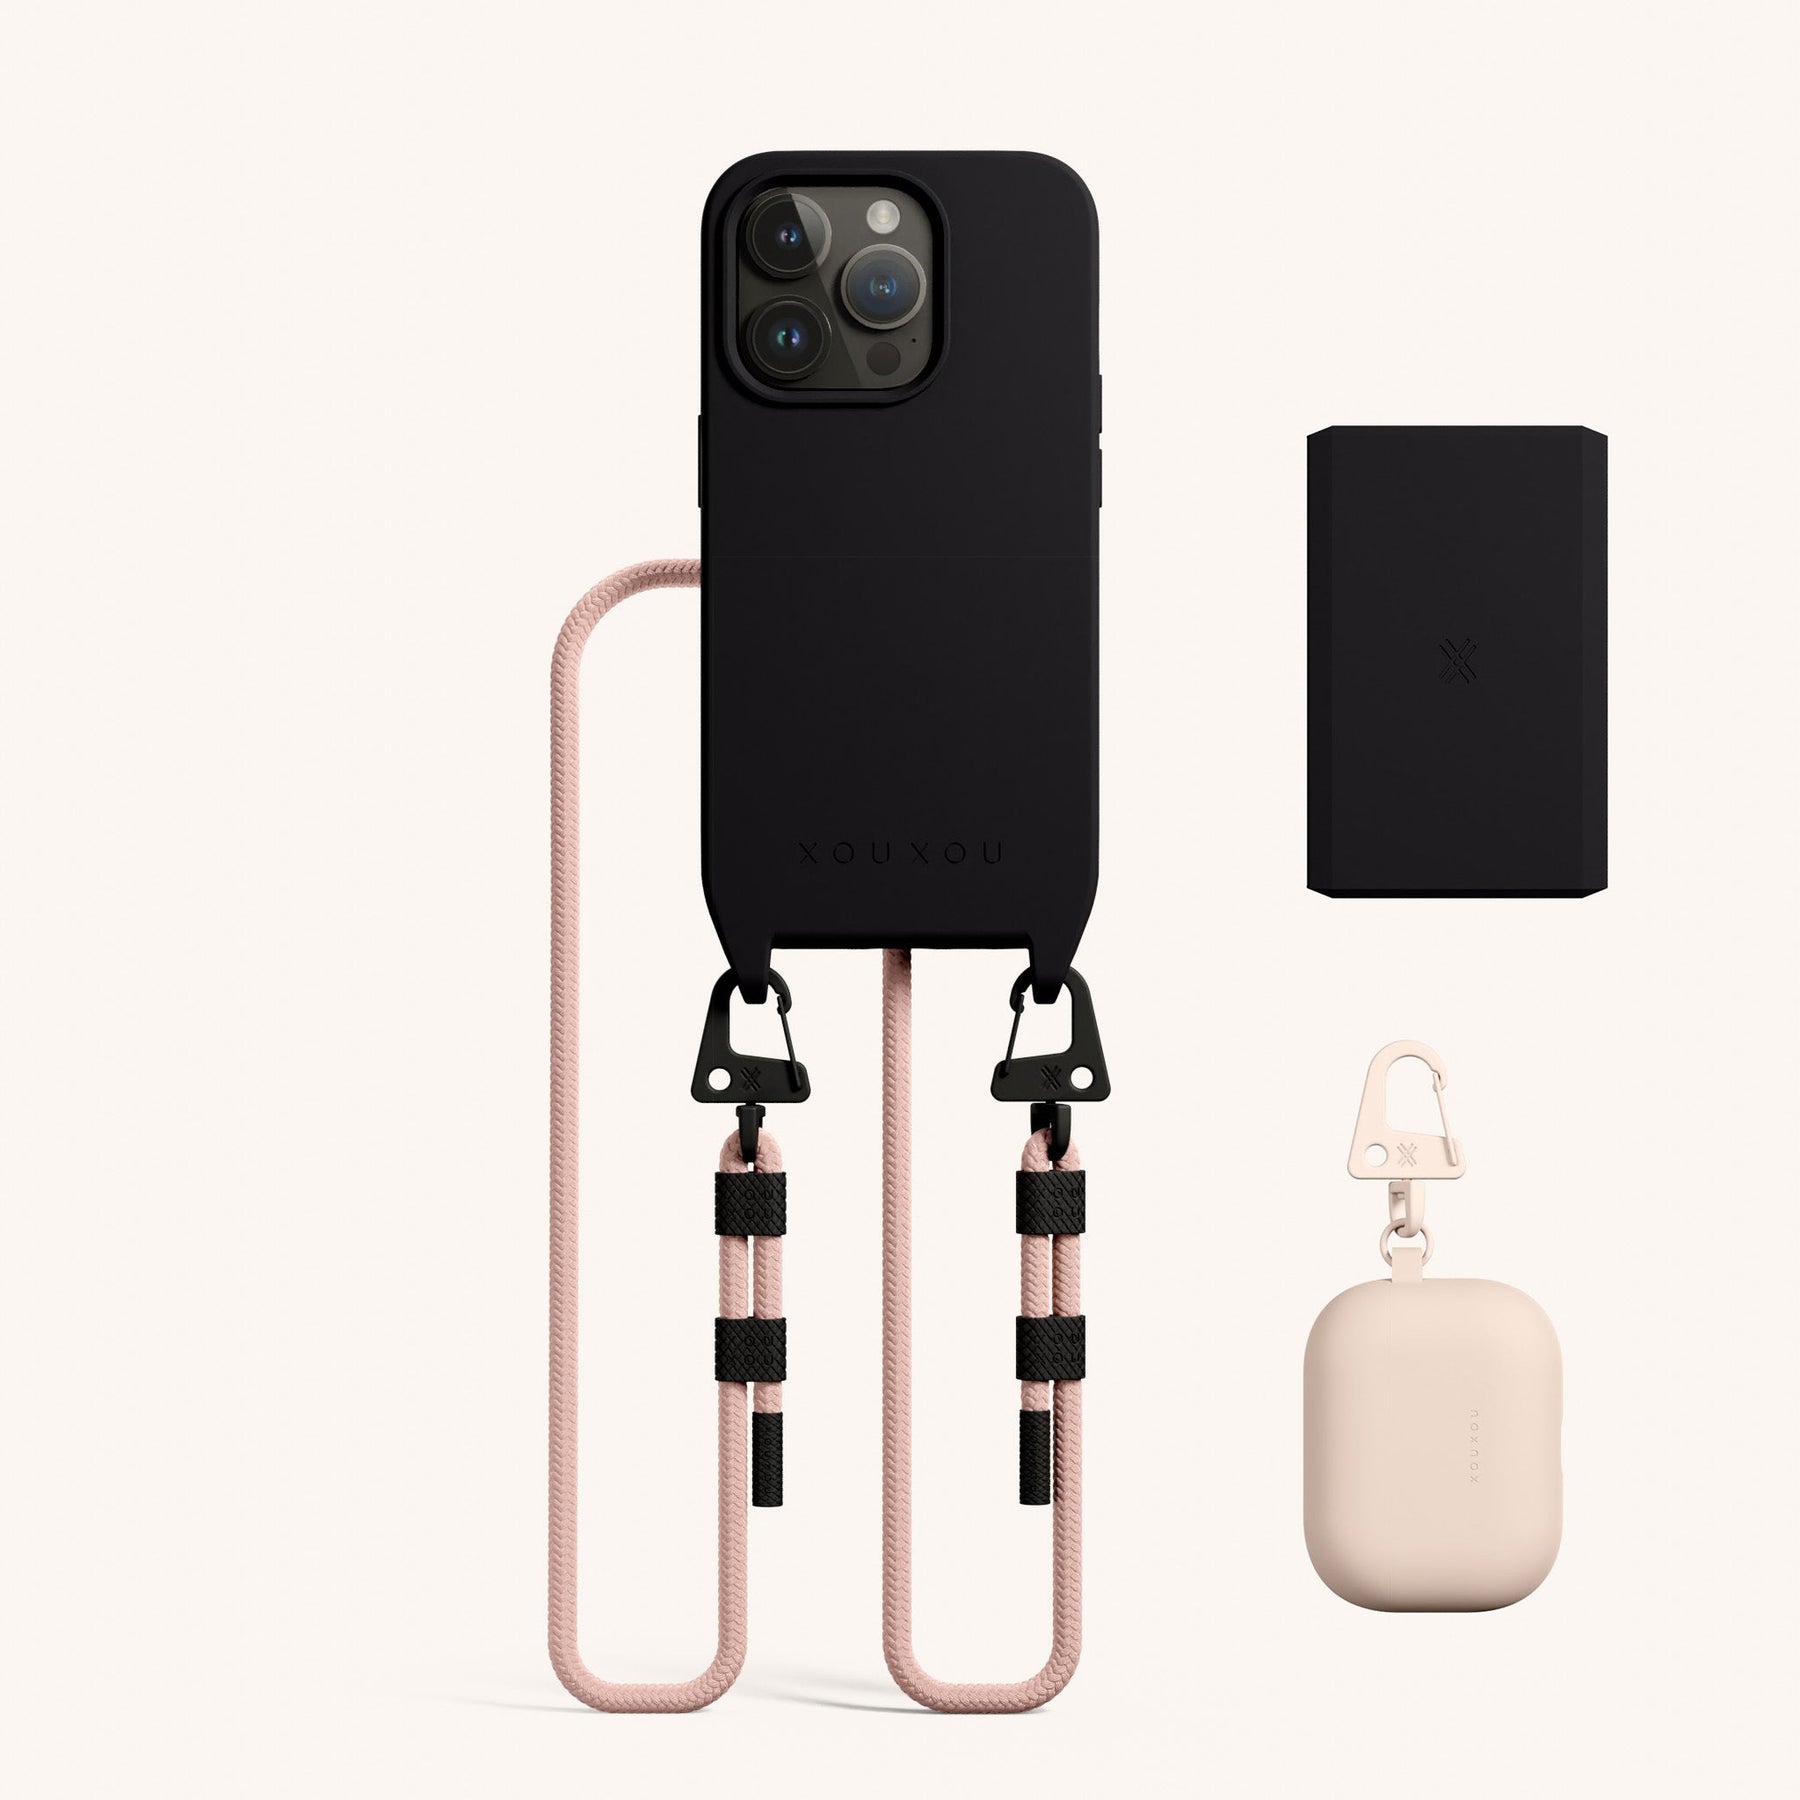 Phone Necklace with Carabiner Rope in Black + Powder Pink & AirPods Case & Wallet (Bundle)